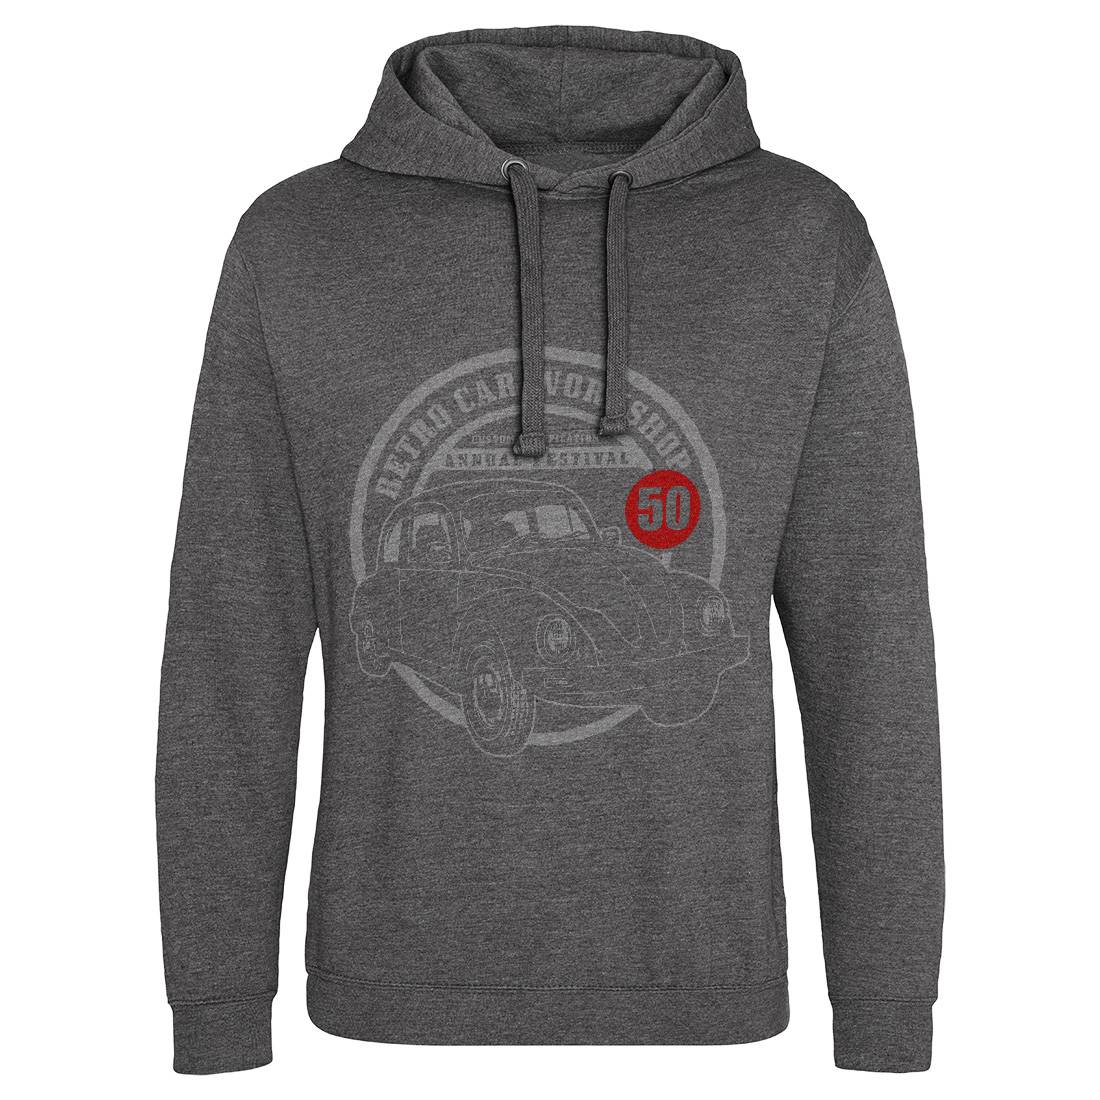 Retro Car Workshop Mens Hoodie Without Pocket Cars A458